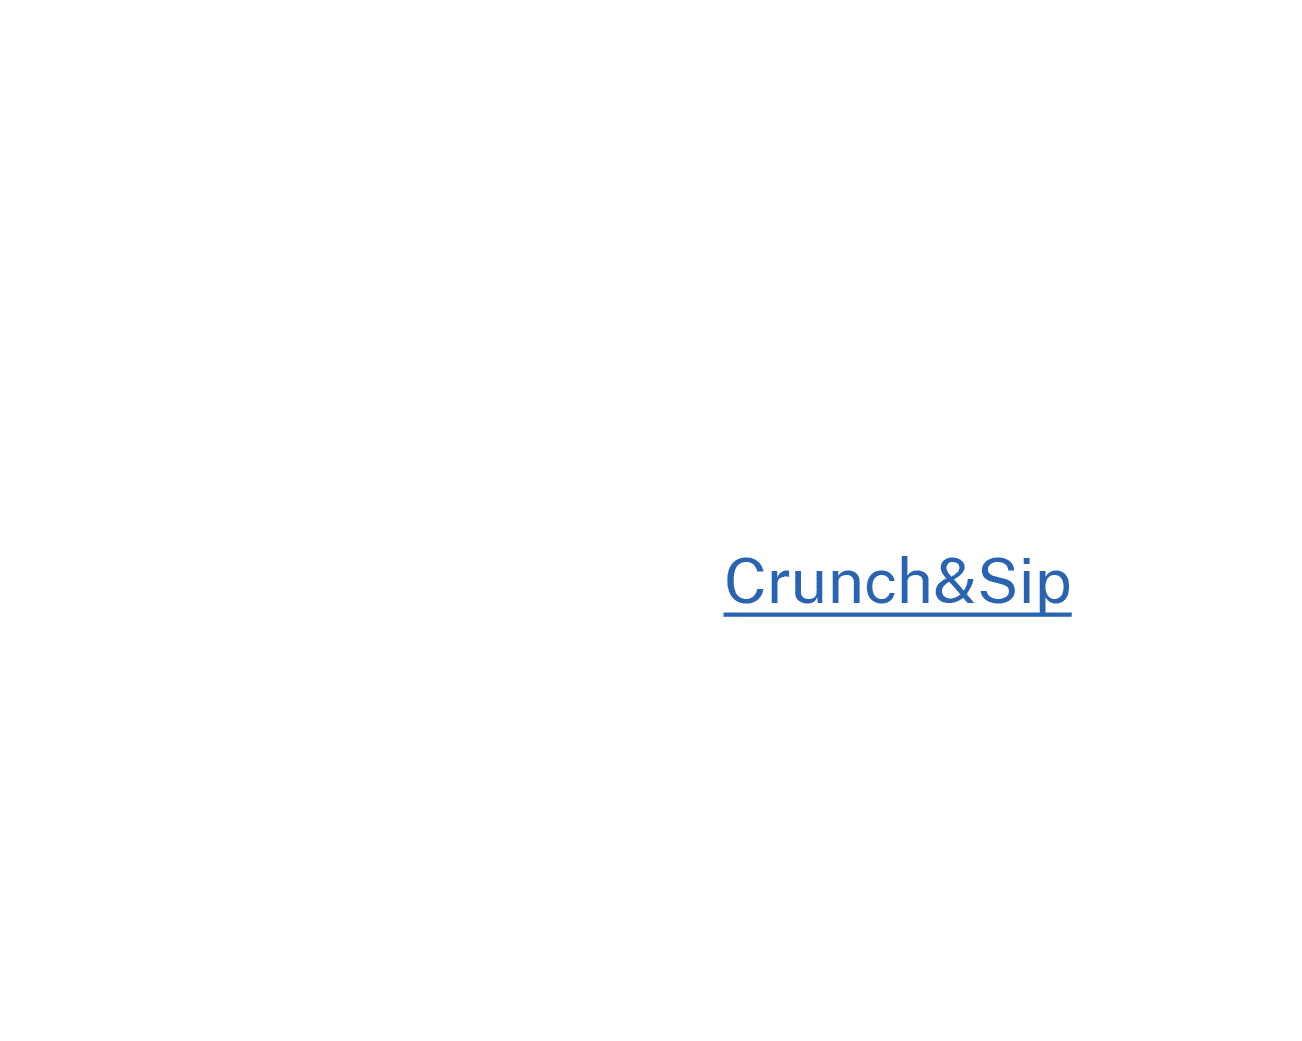 Citrus trees have been planted and, once fruiting, their oranges and mandarins will be given to students for the Crun...